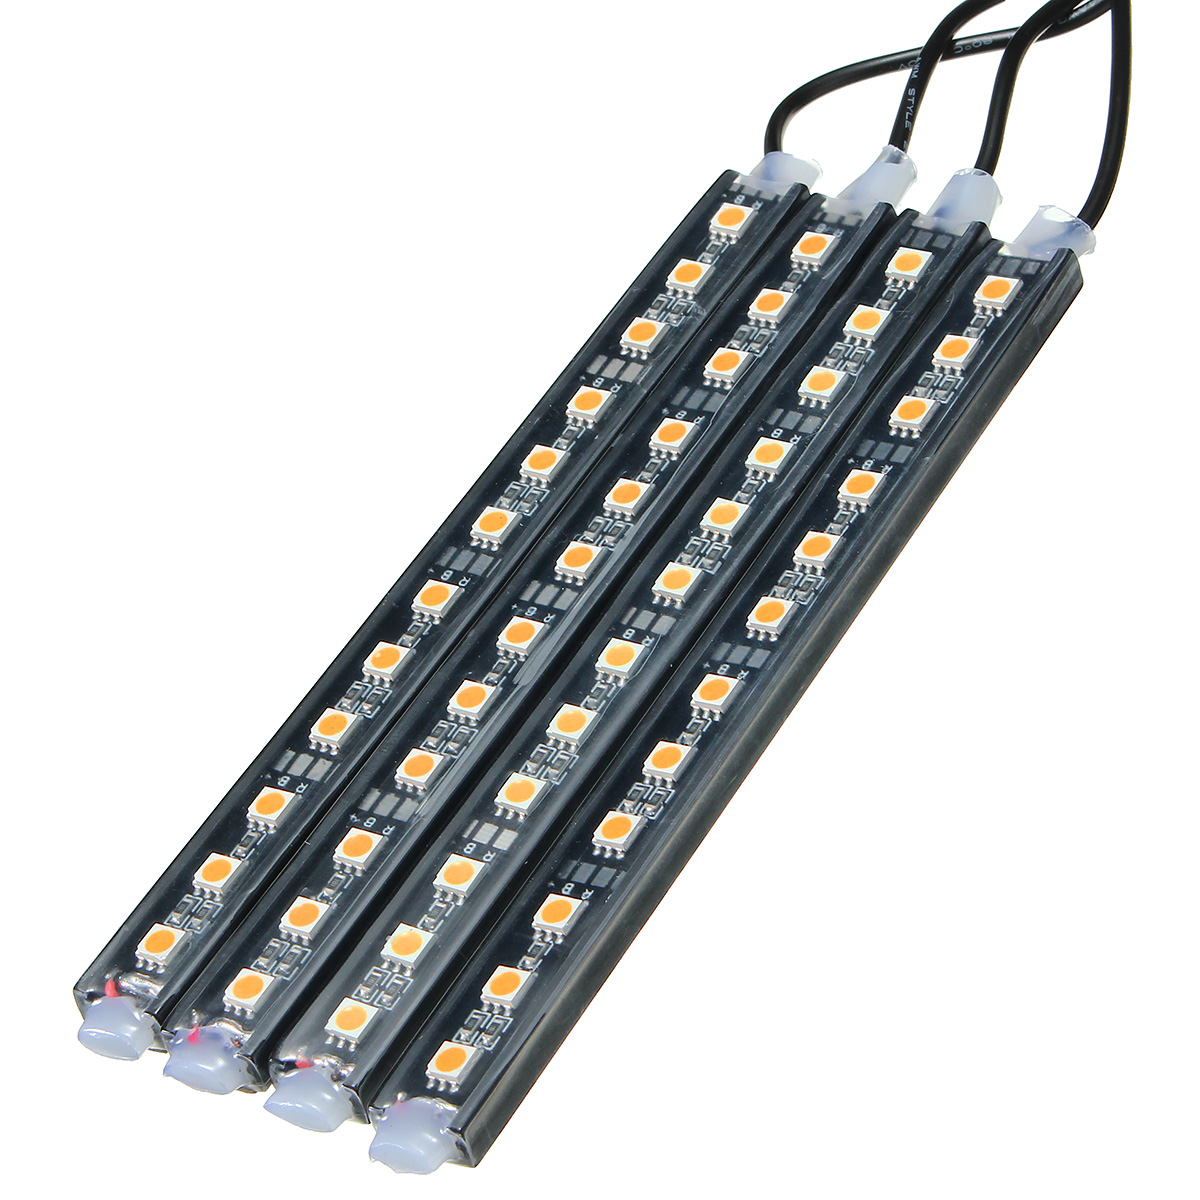 GLIME 12V 48LED 5050smd Car Decorative Atmosphere Light Strips SUV Interior Footwell Neon Lamp